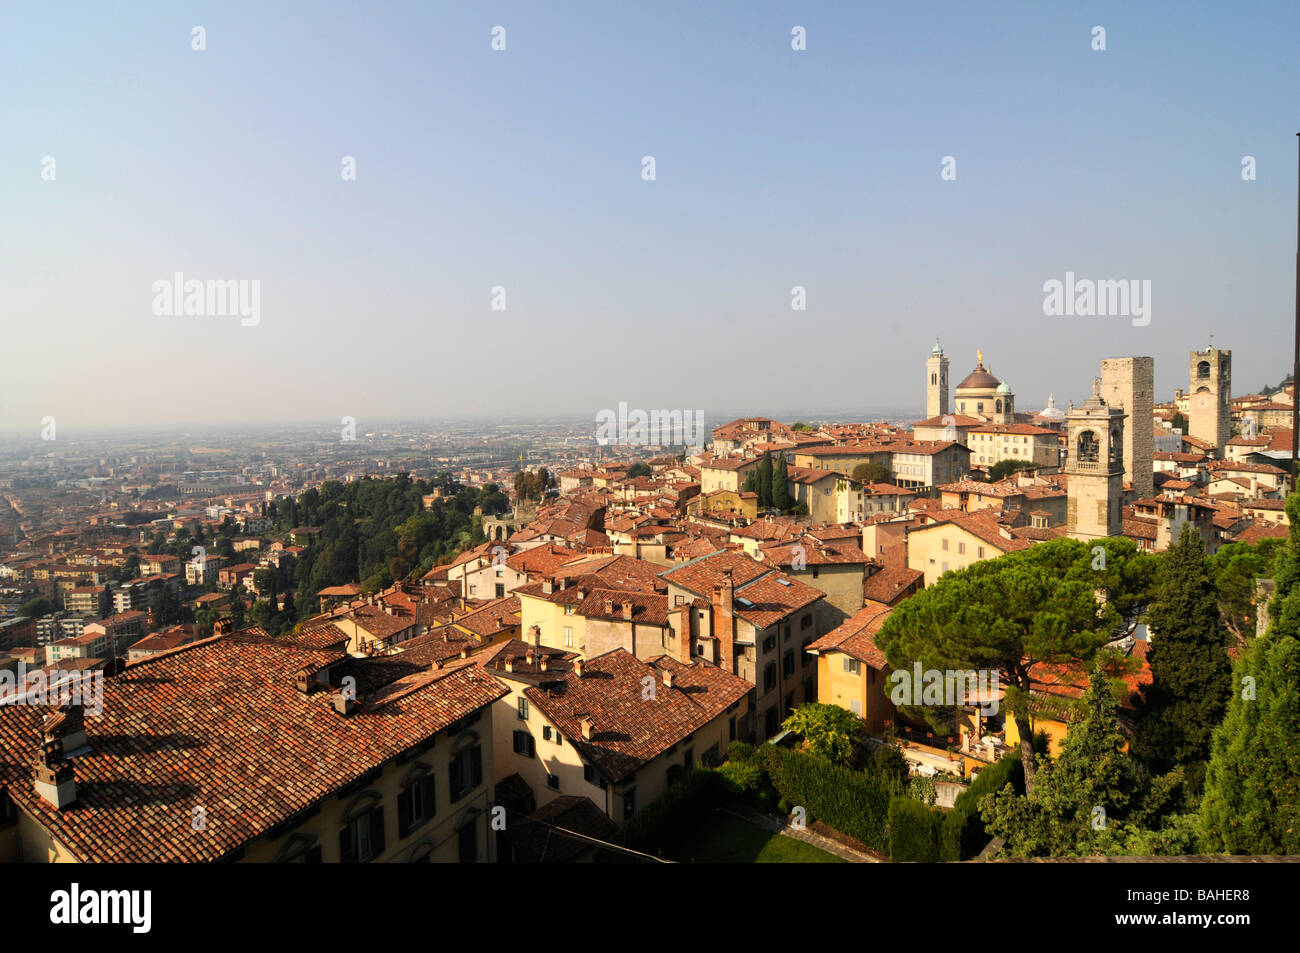 View of the old town of Bergamo, in northern Italy. Stock Photo